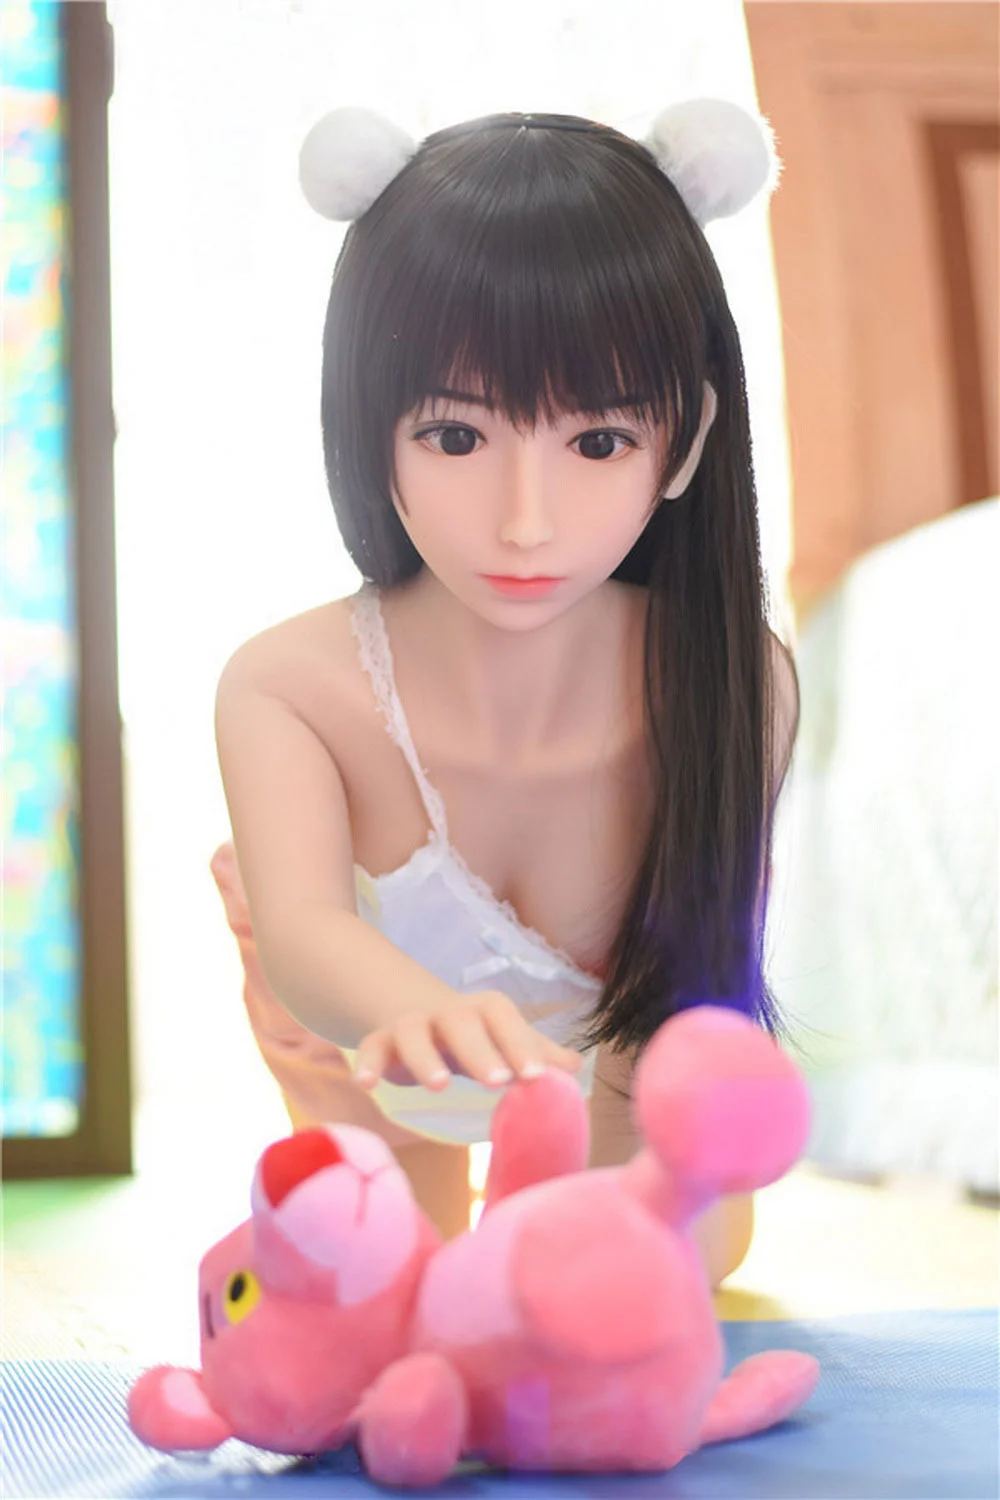 Sex dolls with hand-touched dolls